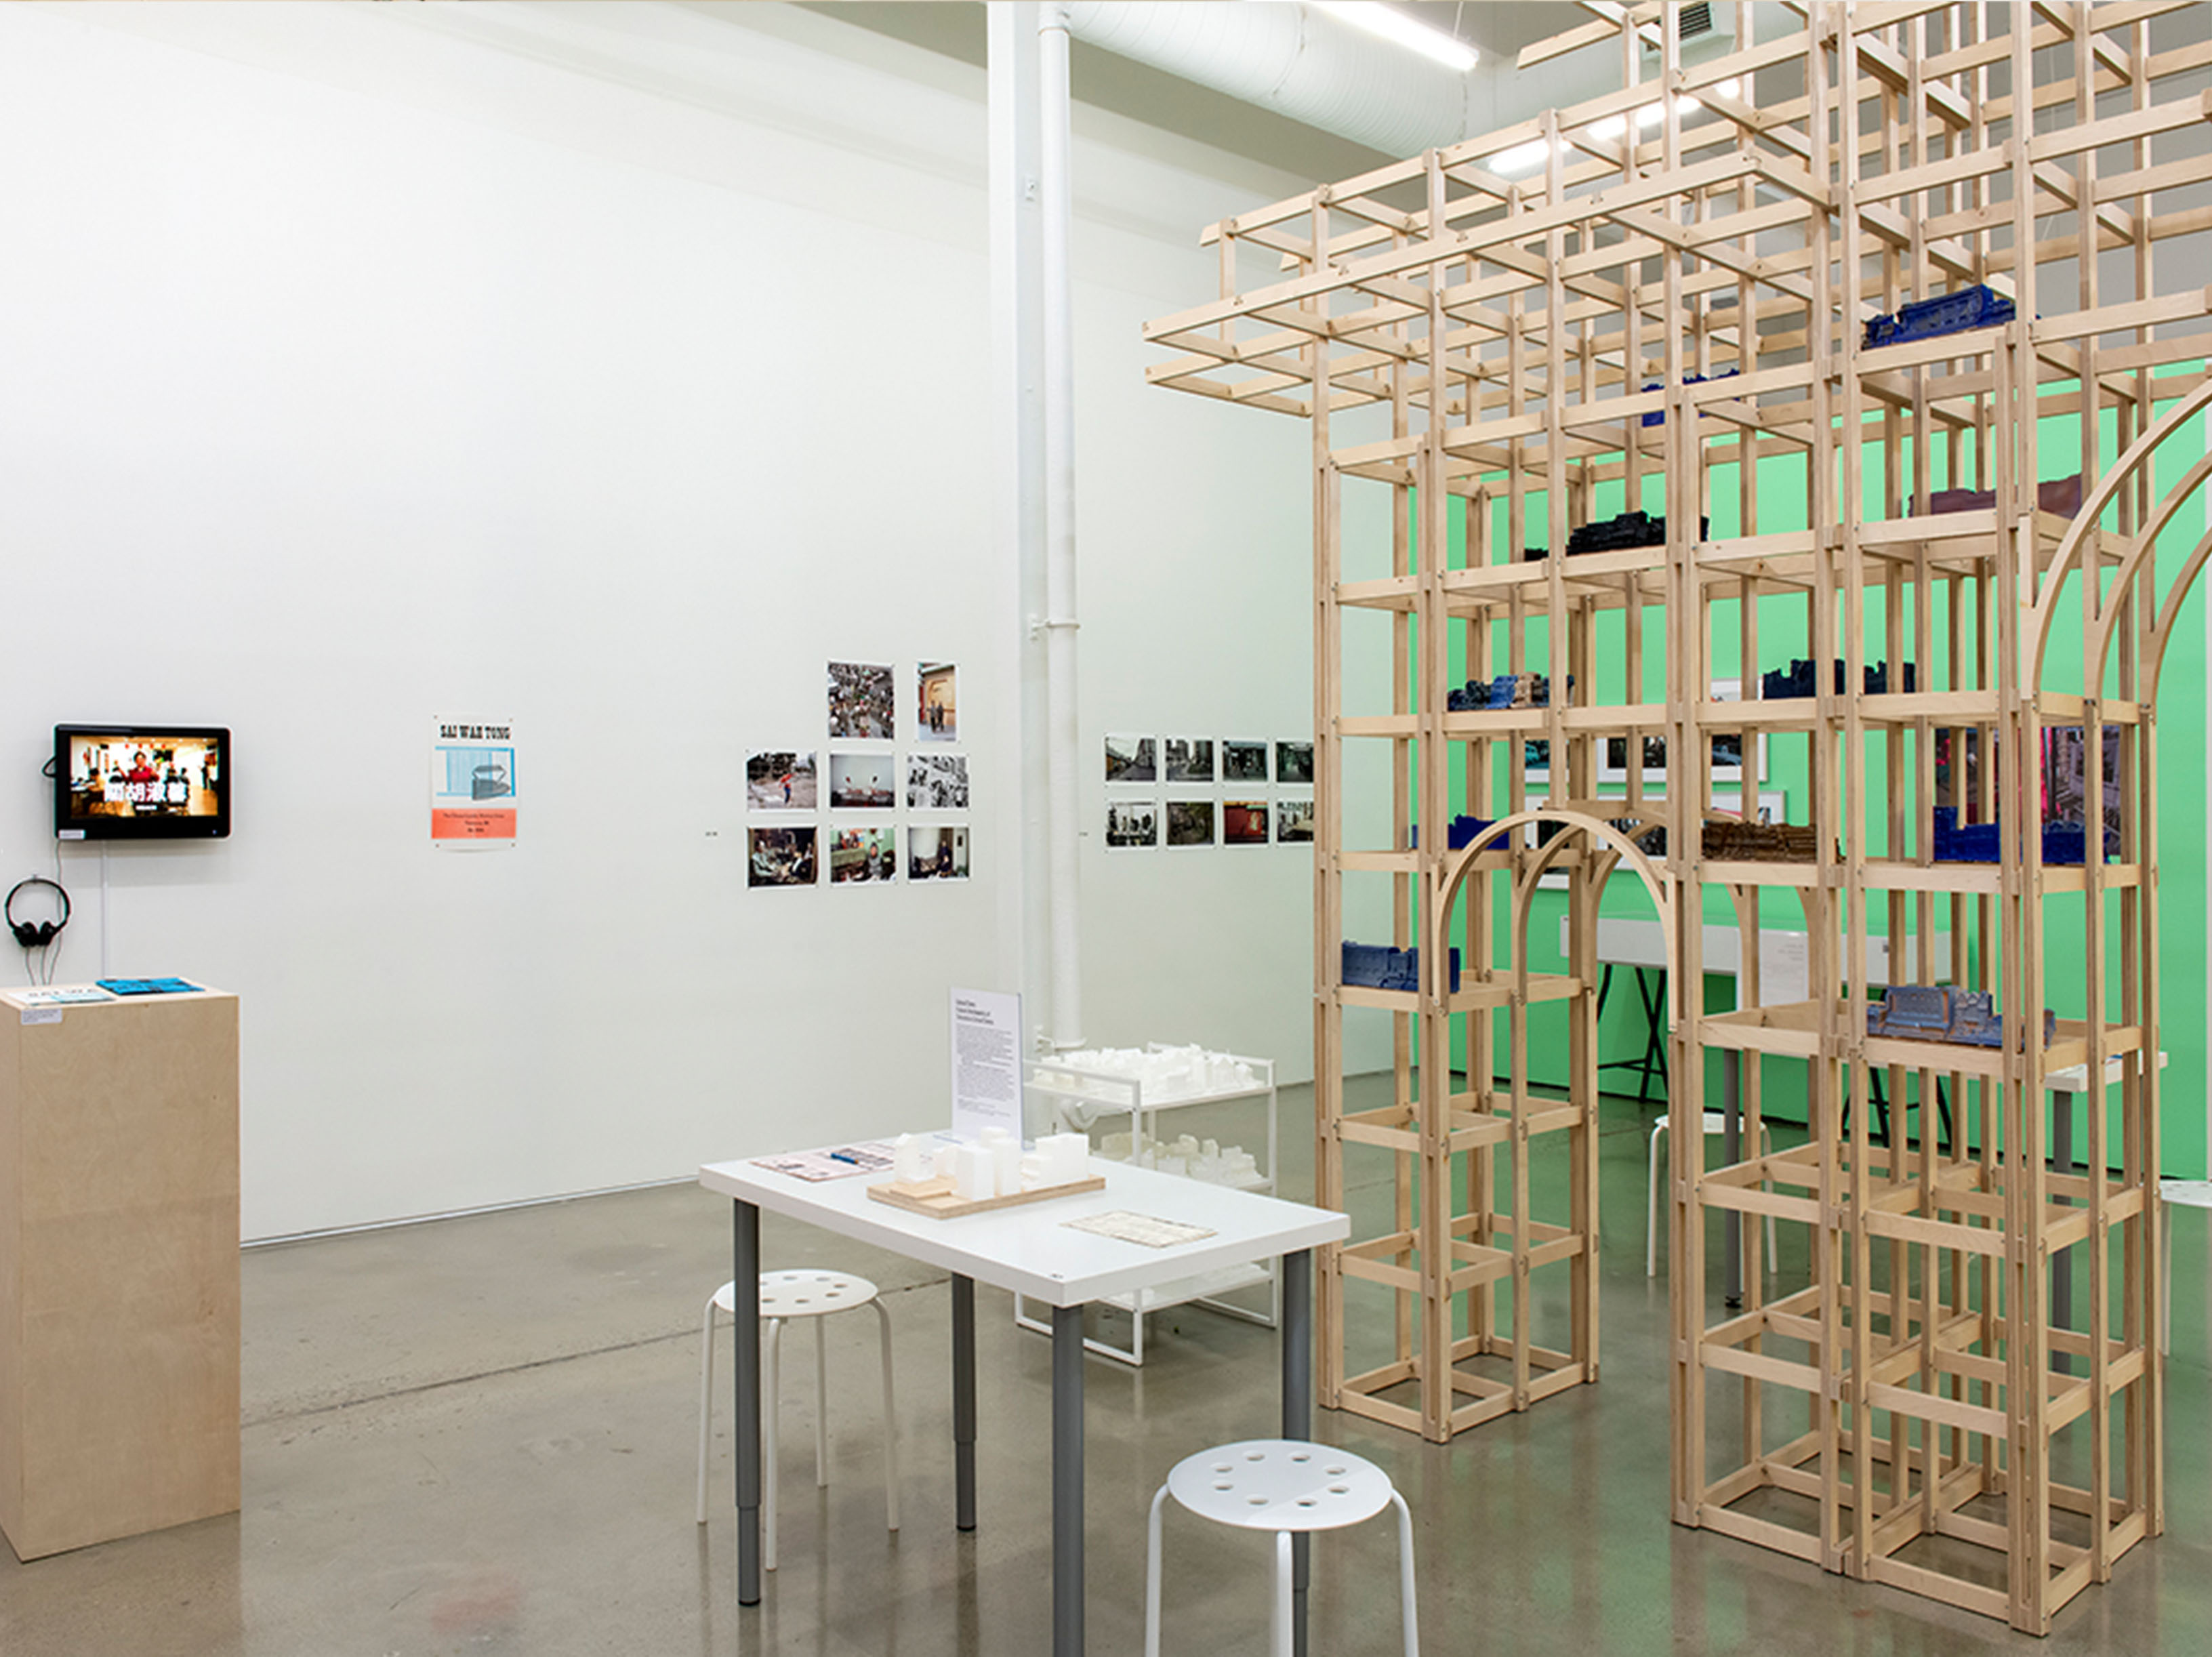 A gallery space with several objects on display. There is a wooden scaffold-looking structure, a tiered cart of small white objects, a white table with a sign and more white objects, and framed art on the walls.